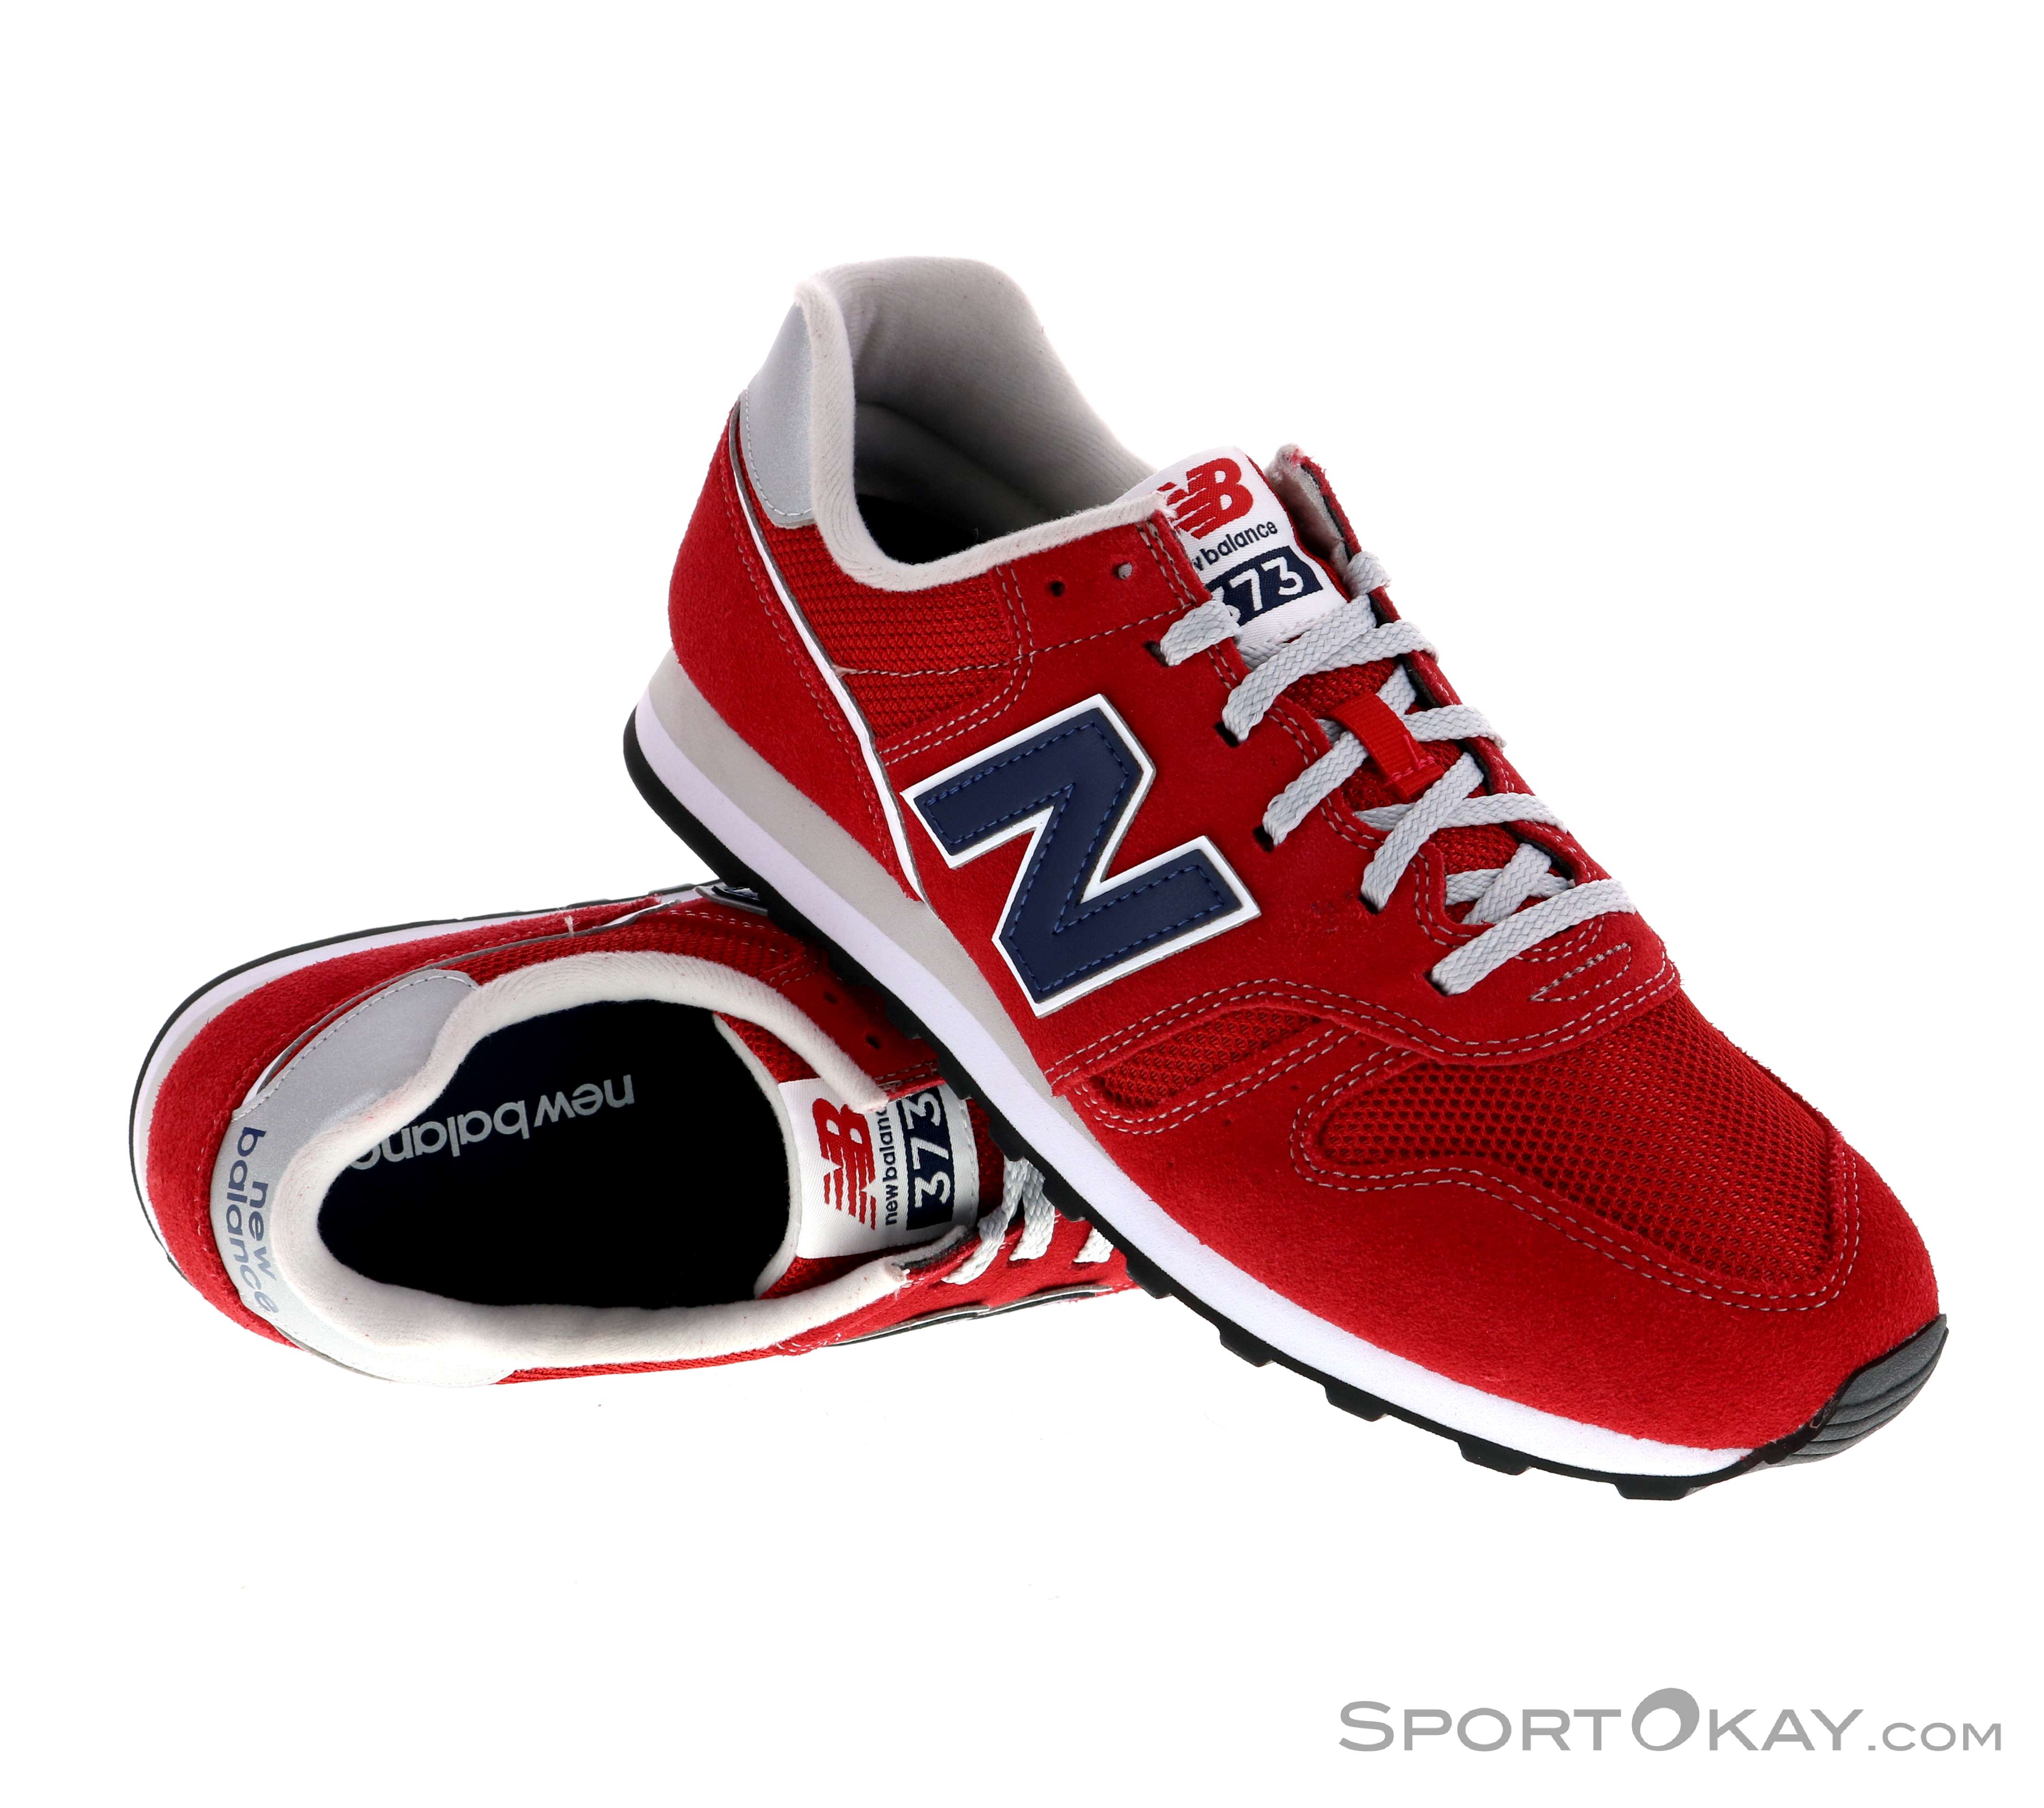 New Balance 373 Mens Leisure Shoes - Shoes Shoes & - Outdoor - All